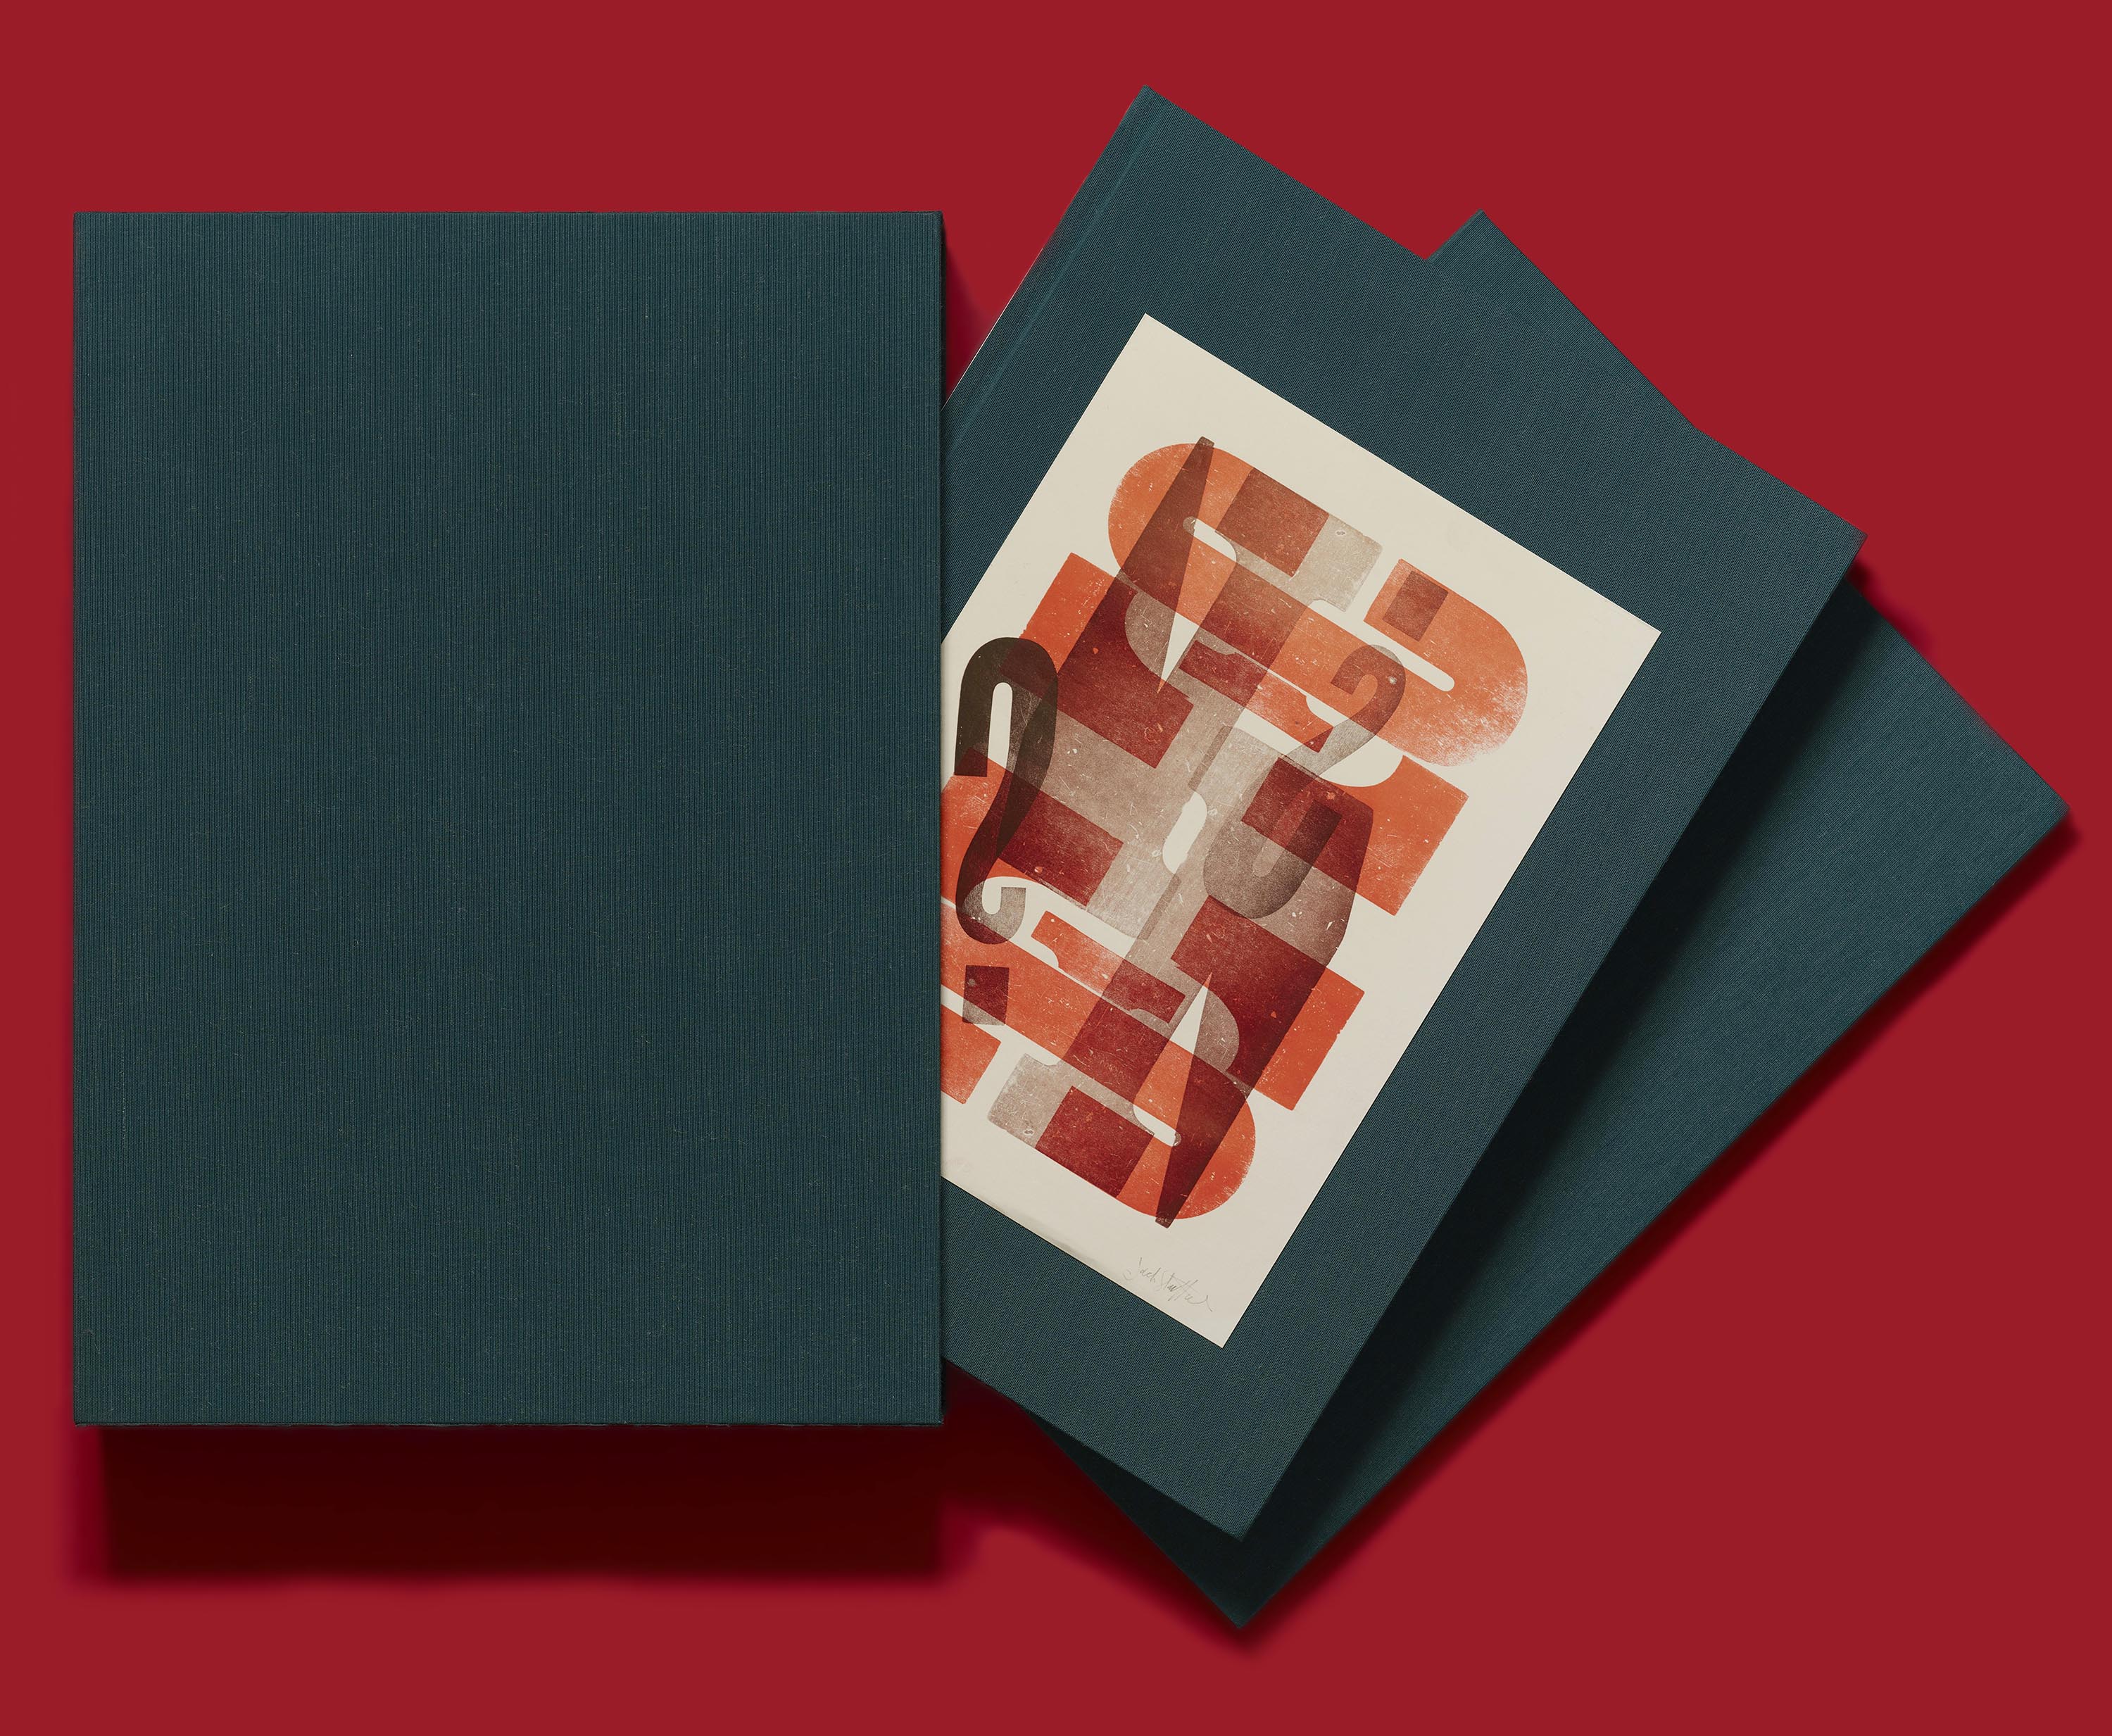 The deluxe edition of Only on Saturday, with its portfolio of letterpress proofs.